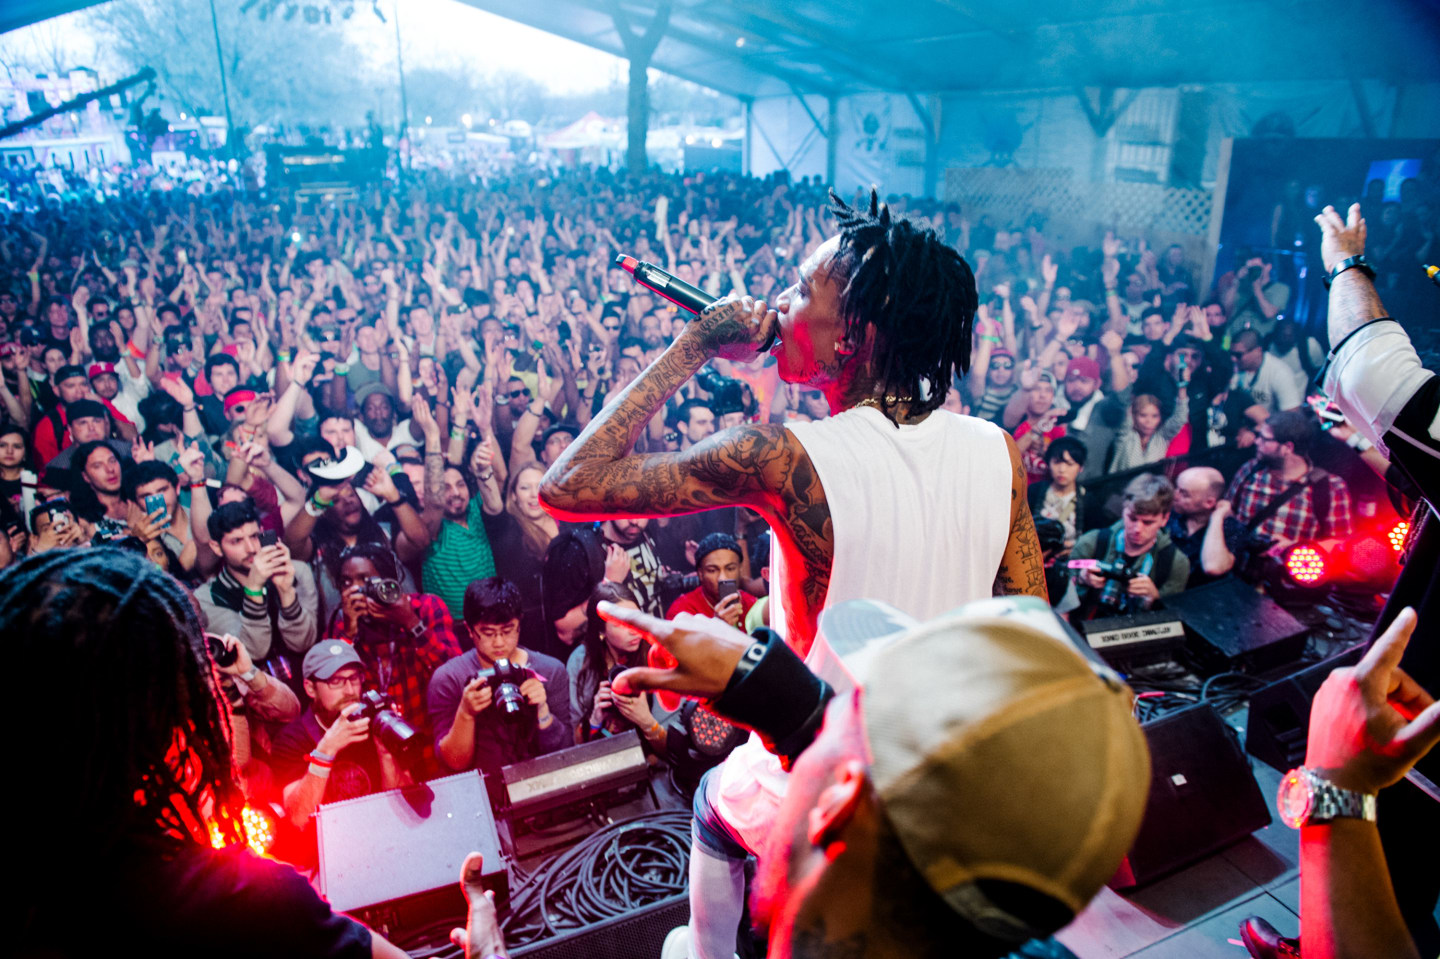 Introducing FADER FORT: Setting The Stage